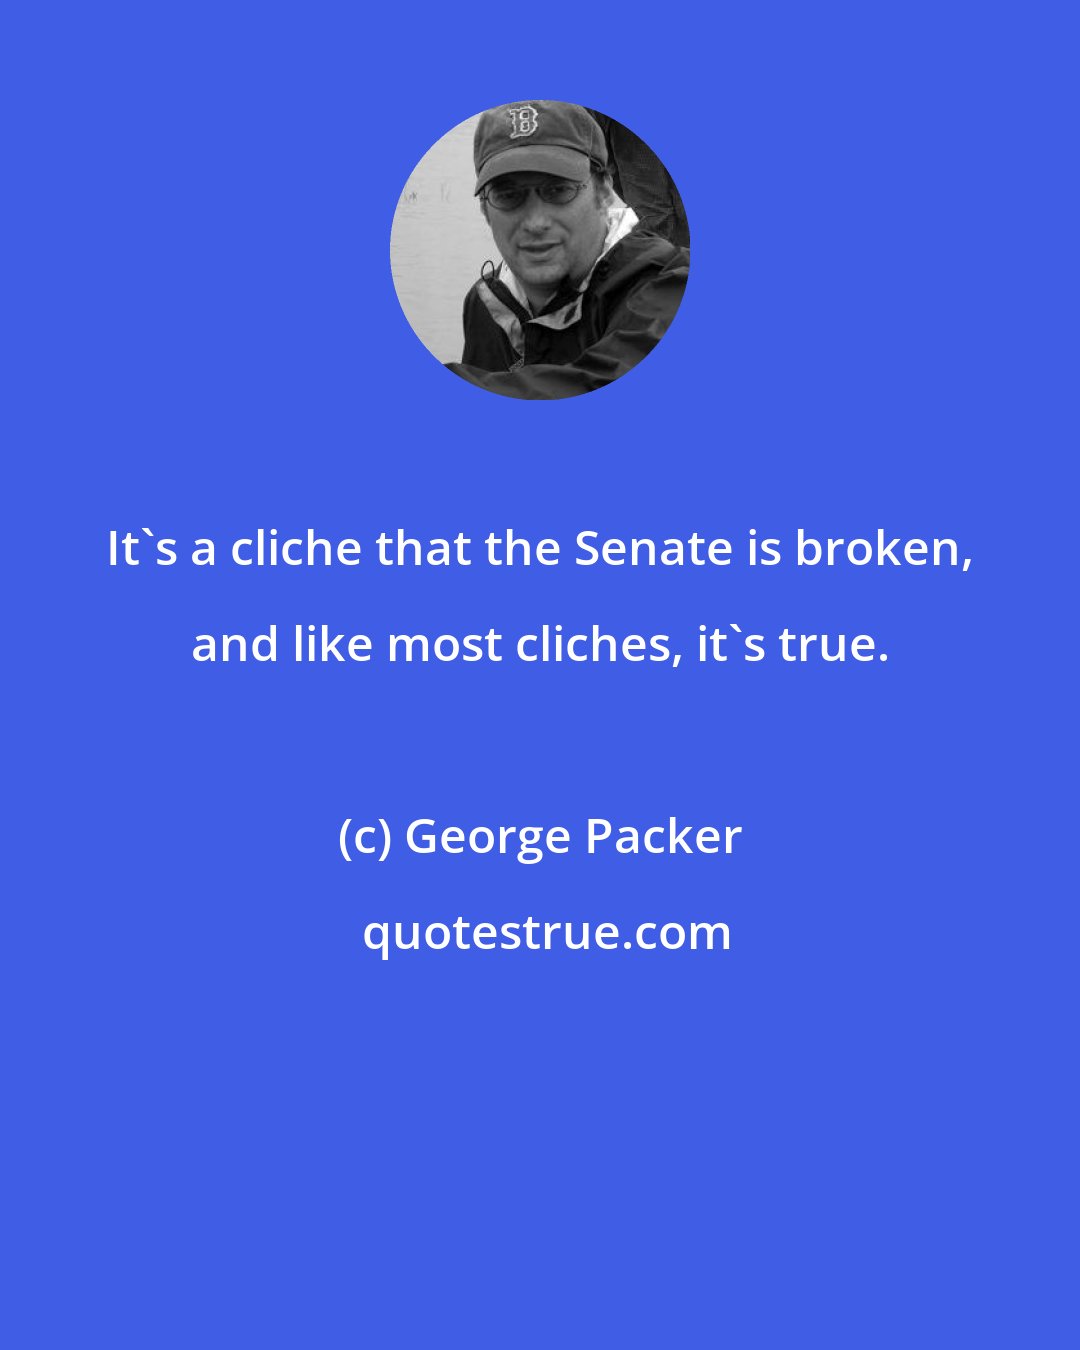 George Packer: It's a cliche that the Senate is broken, and like most cliches, it's true.